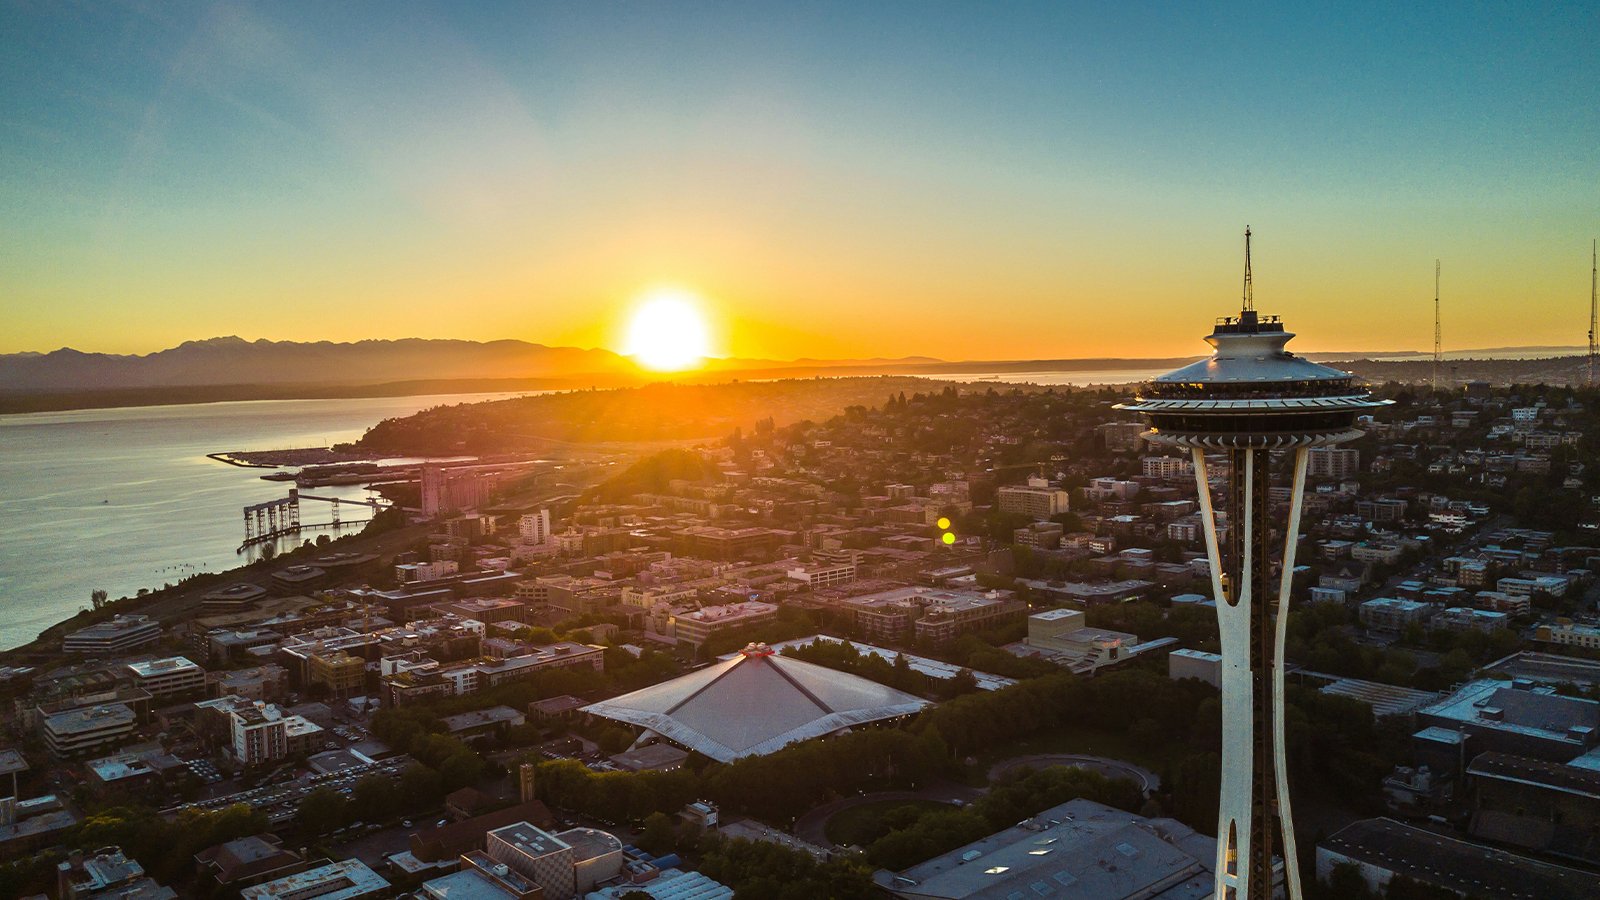 A view of the Seattle Space Needle with the sun setting in the distant background.